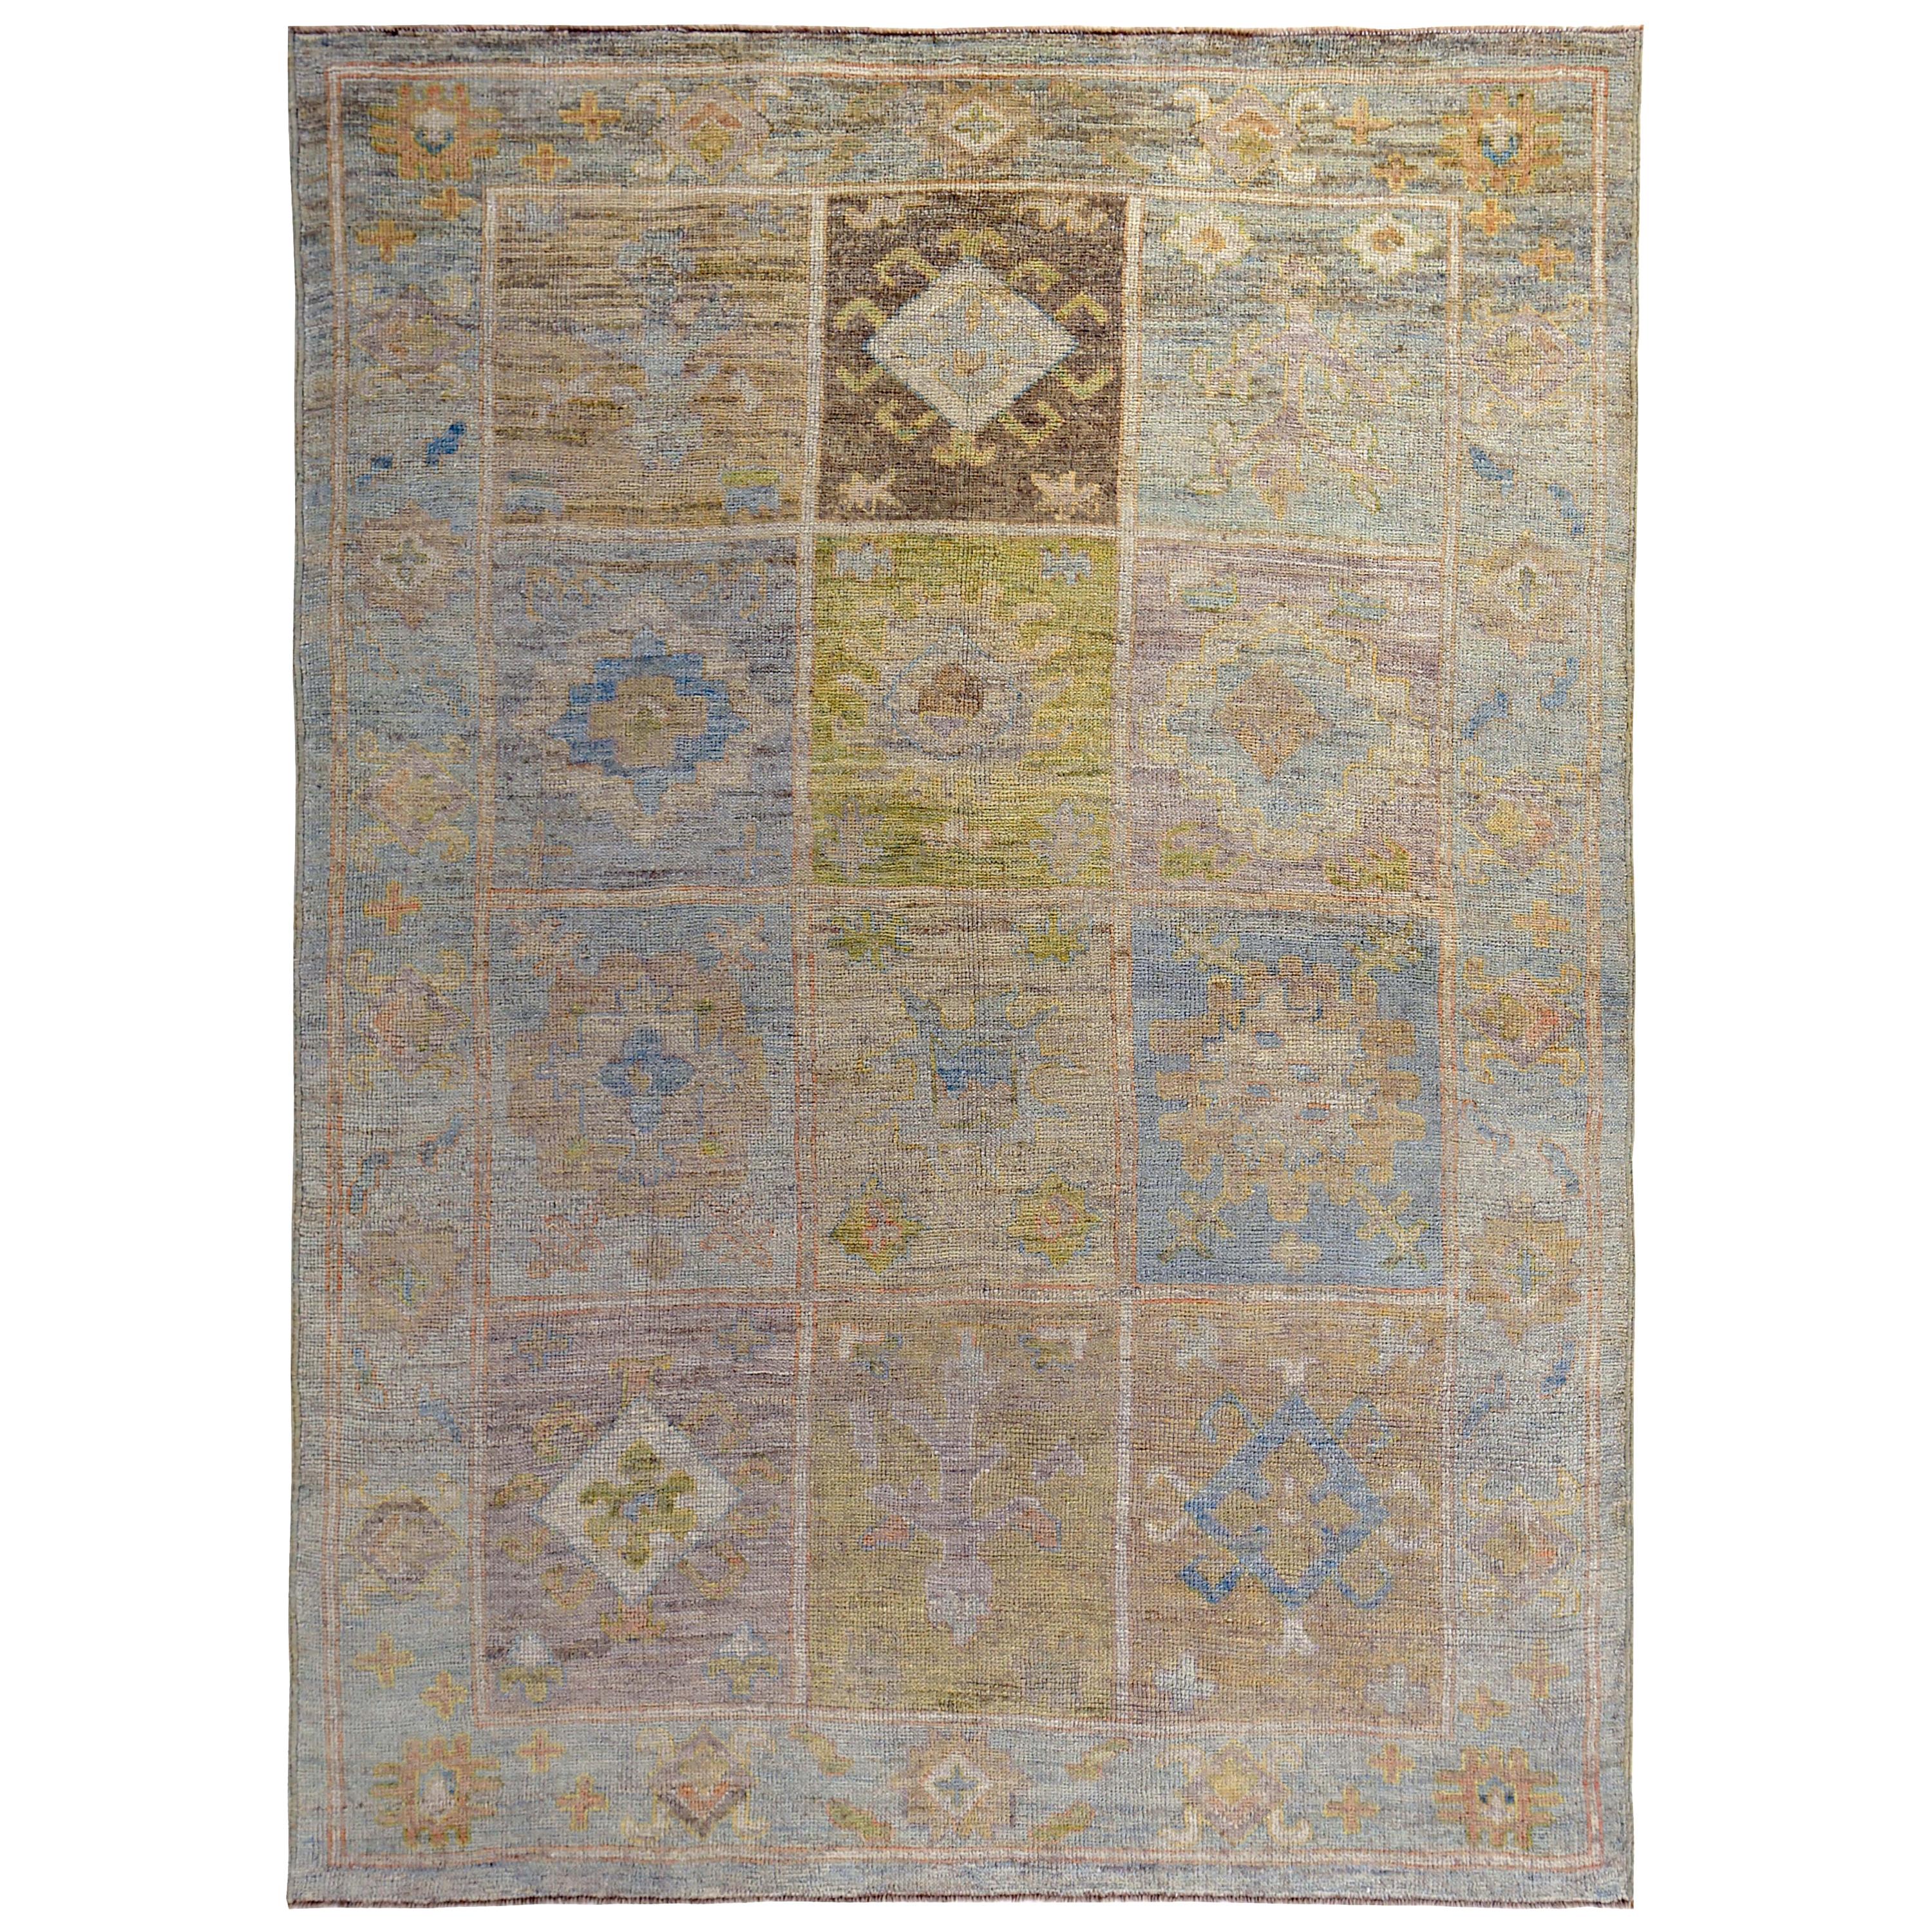 New Turkish Oushak Rug with Yellow Orange and Green Floral Details on Blue Field